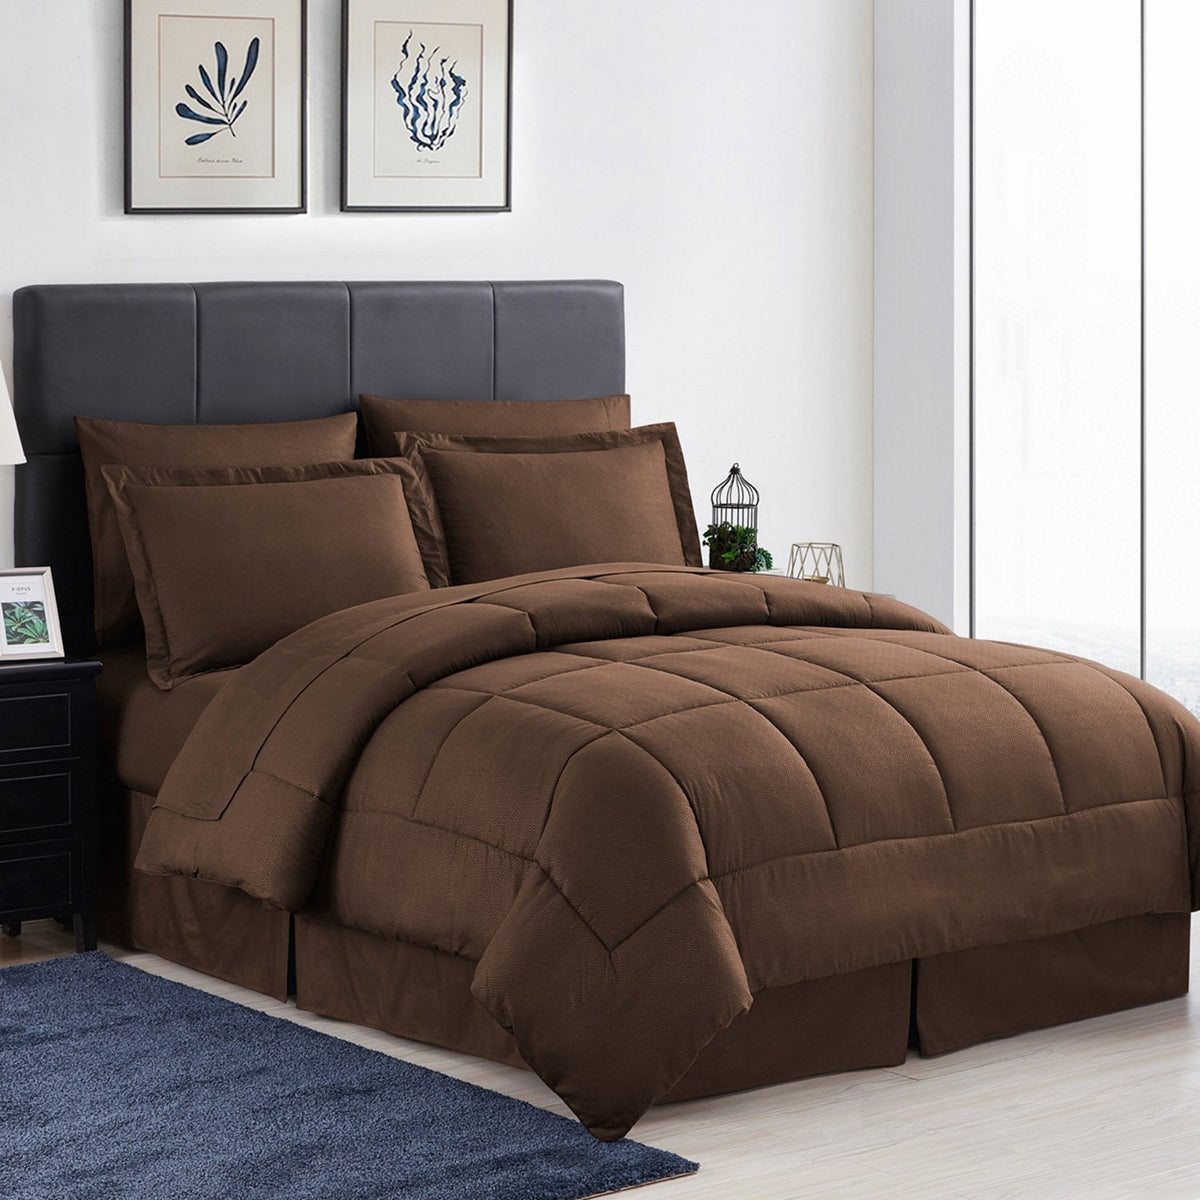 Greek Key 8-Piece Bed In A Bag Comforter Set Chocolate - Bed